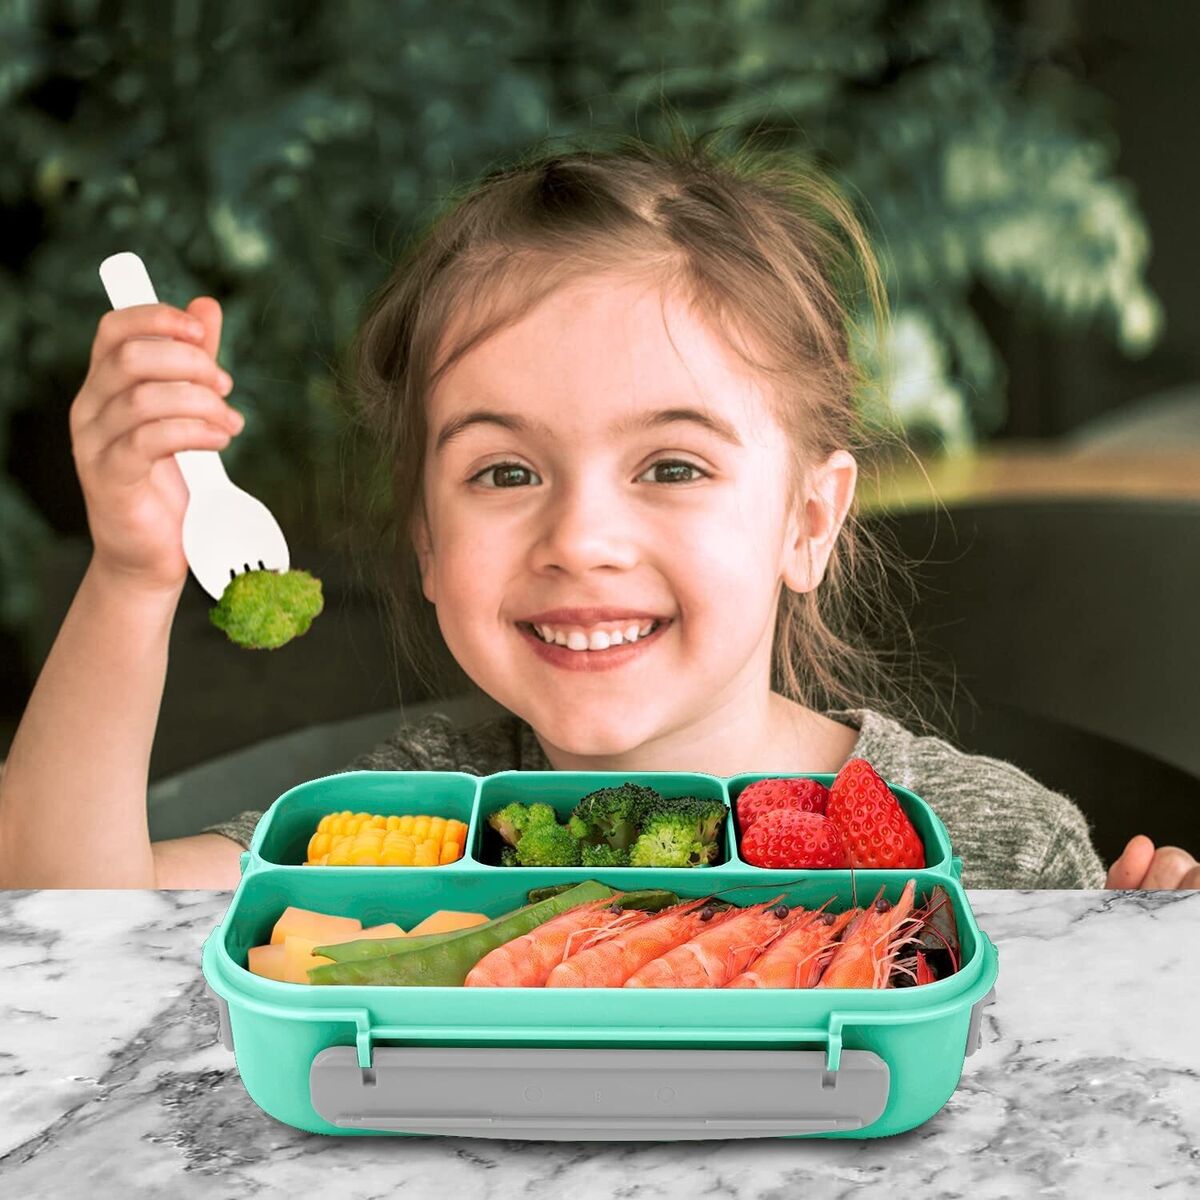 Bento Lunch Box for Kids Girls Boys,4 Compartment Bento Box Adult